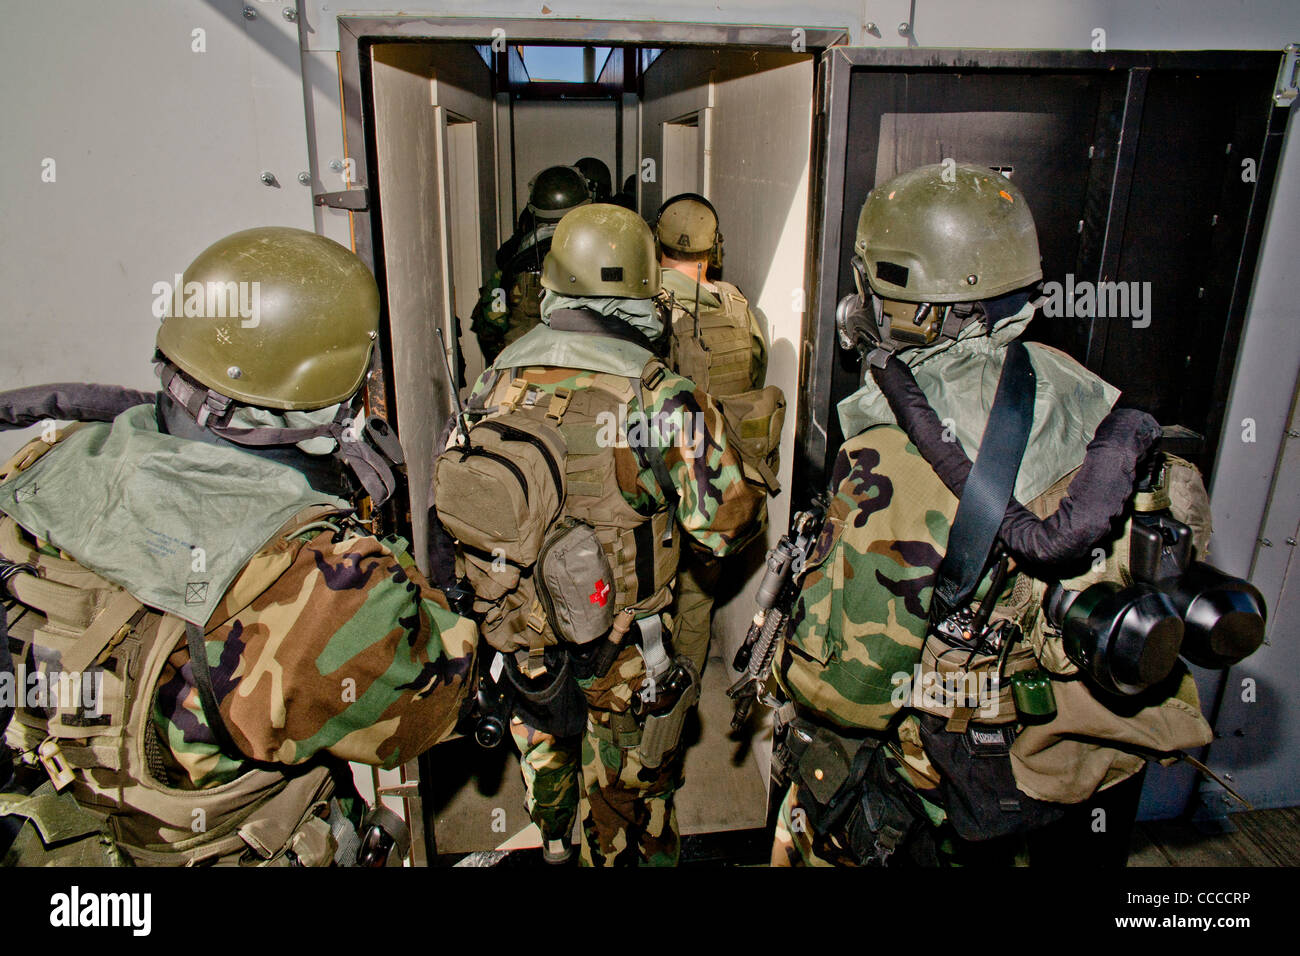 FBI SWAT (Special Weapons and Tactics) team members wear specialized 'Weapons of Mass Destruction' equipment during training. Stock Photo